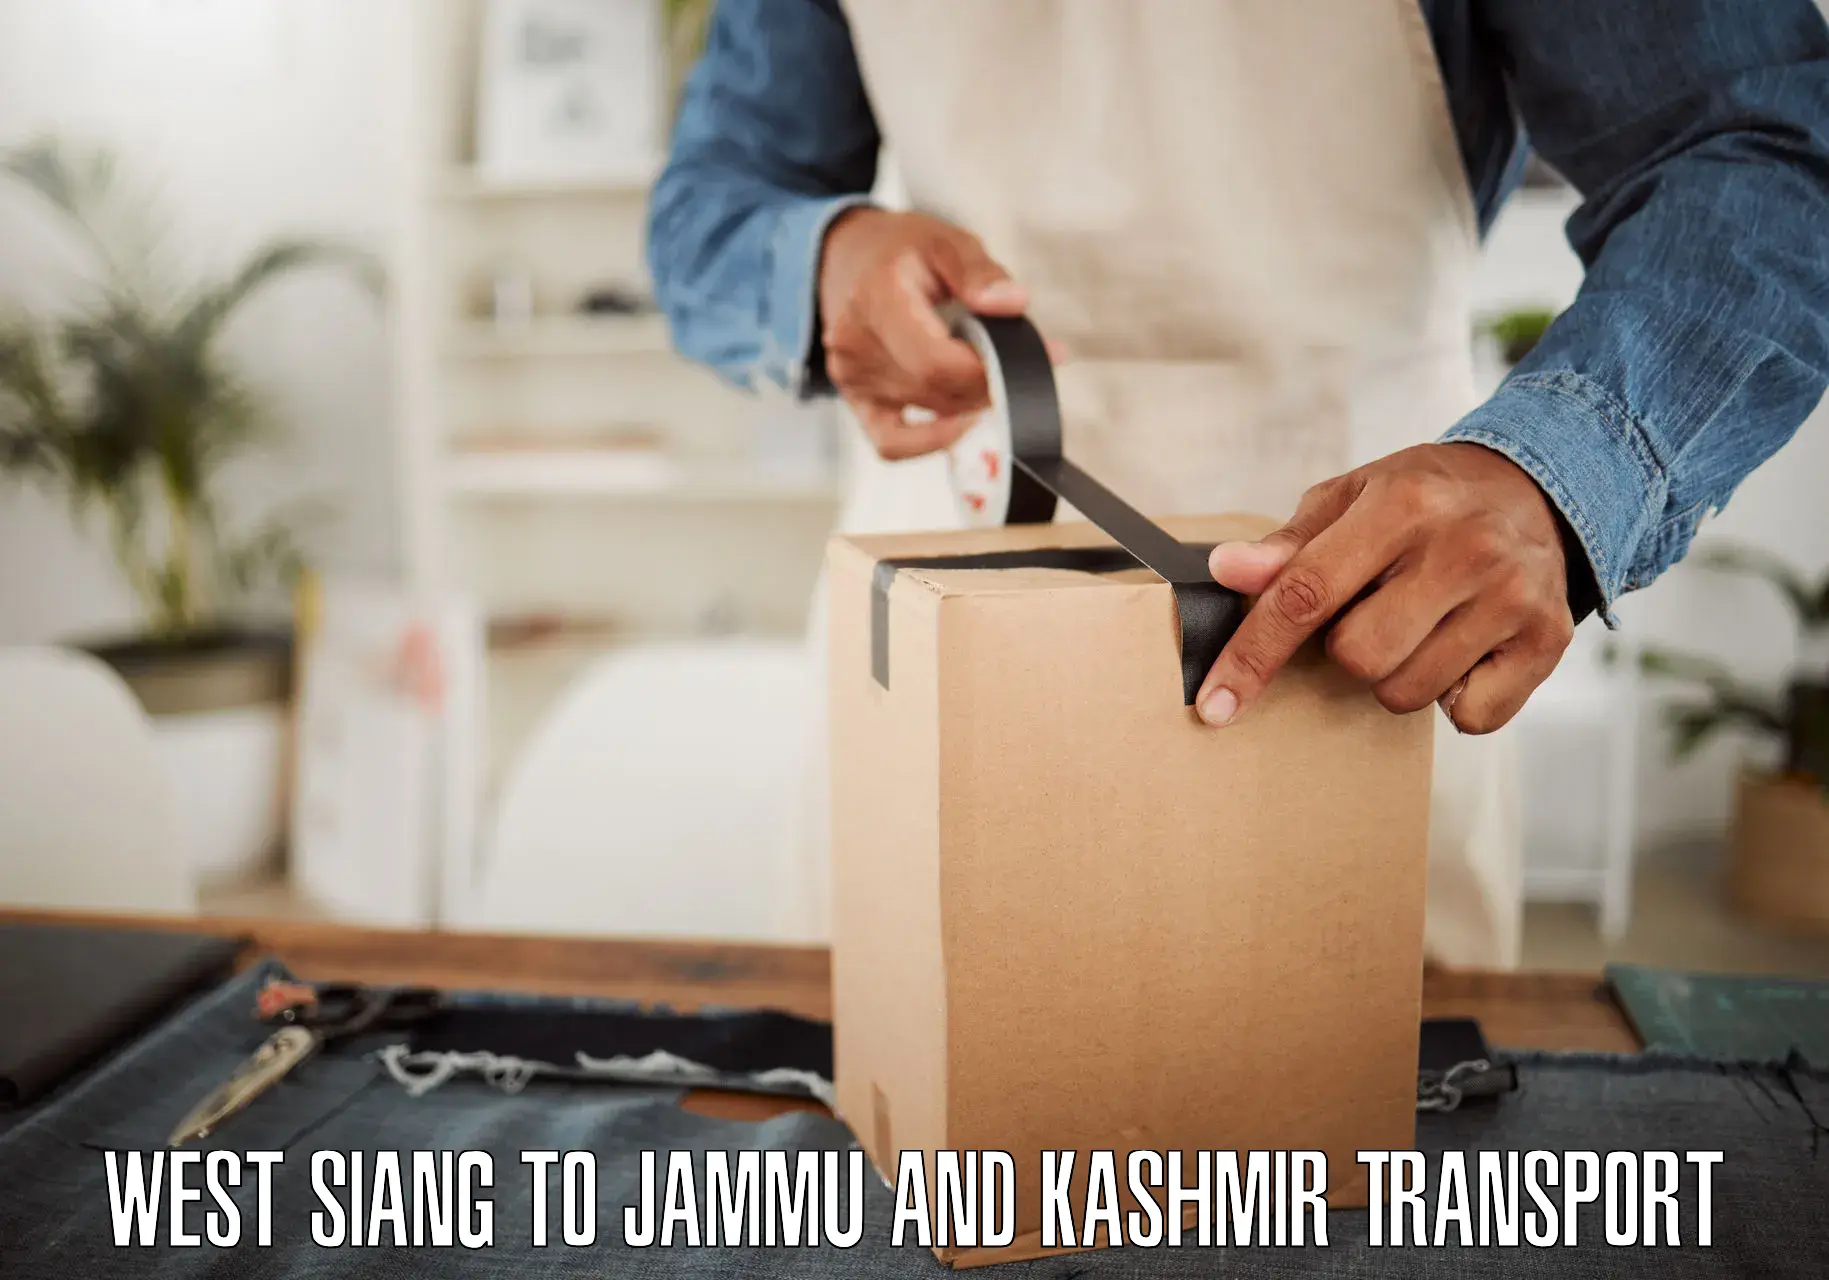 Logistics transportation services West Siang to Jammu and Kashmir